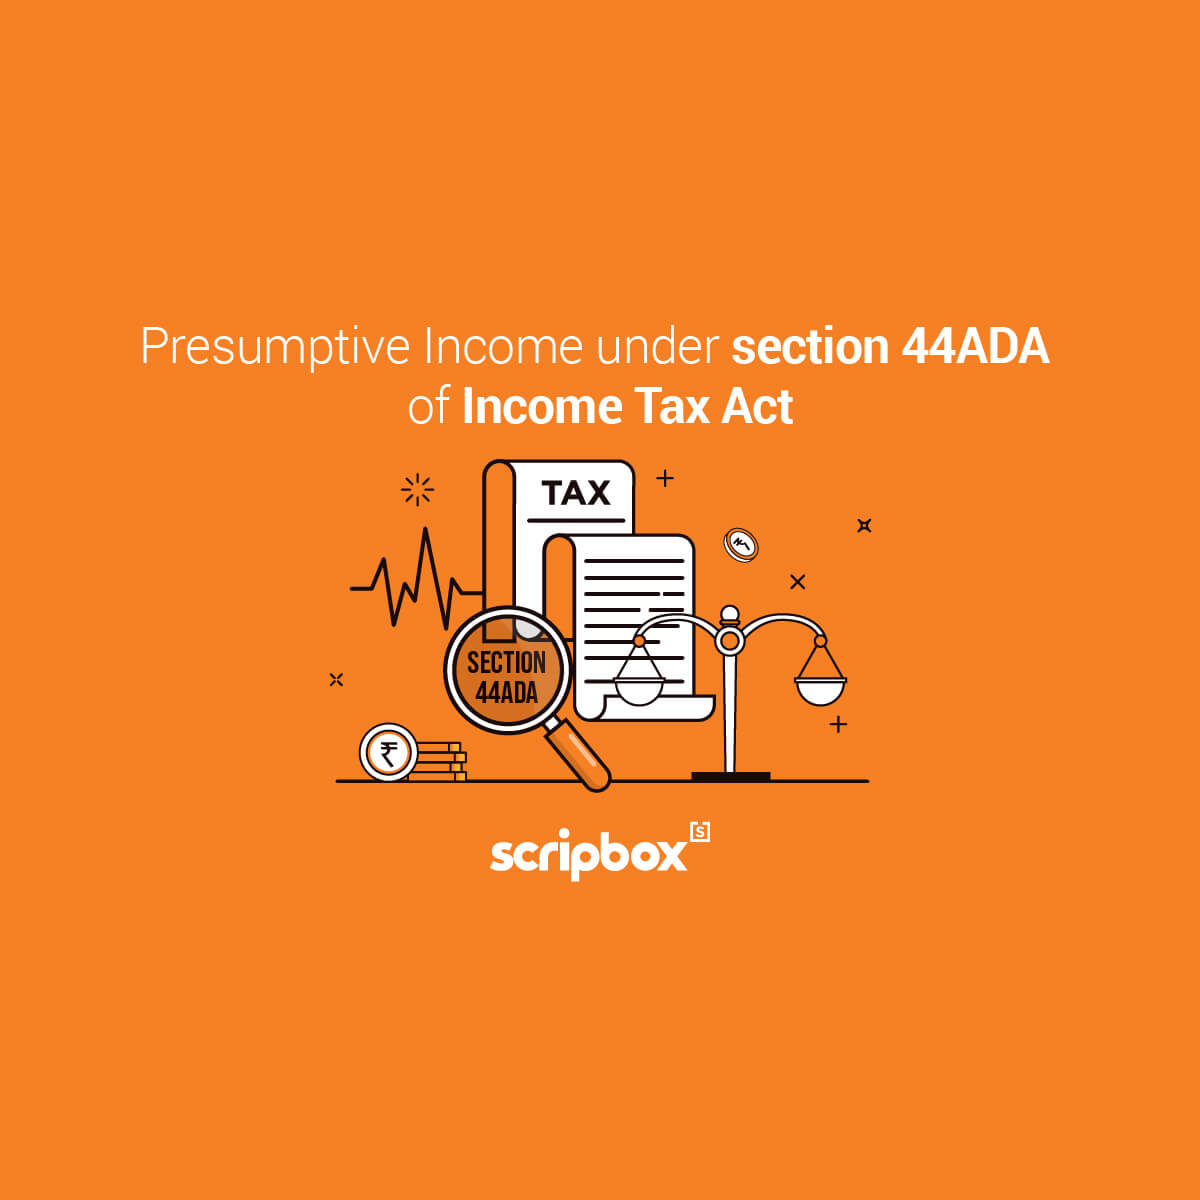 section 44ada of income tax act